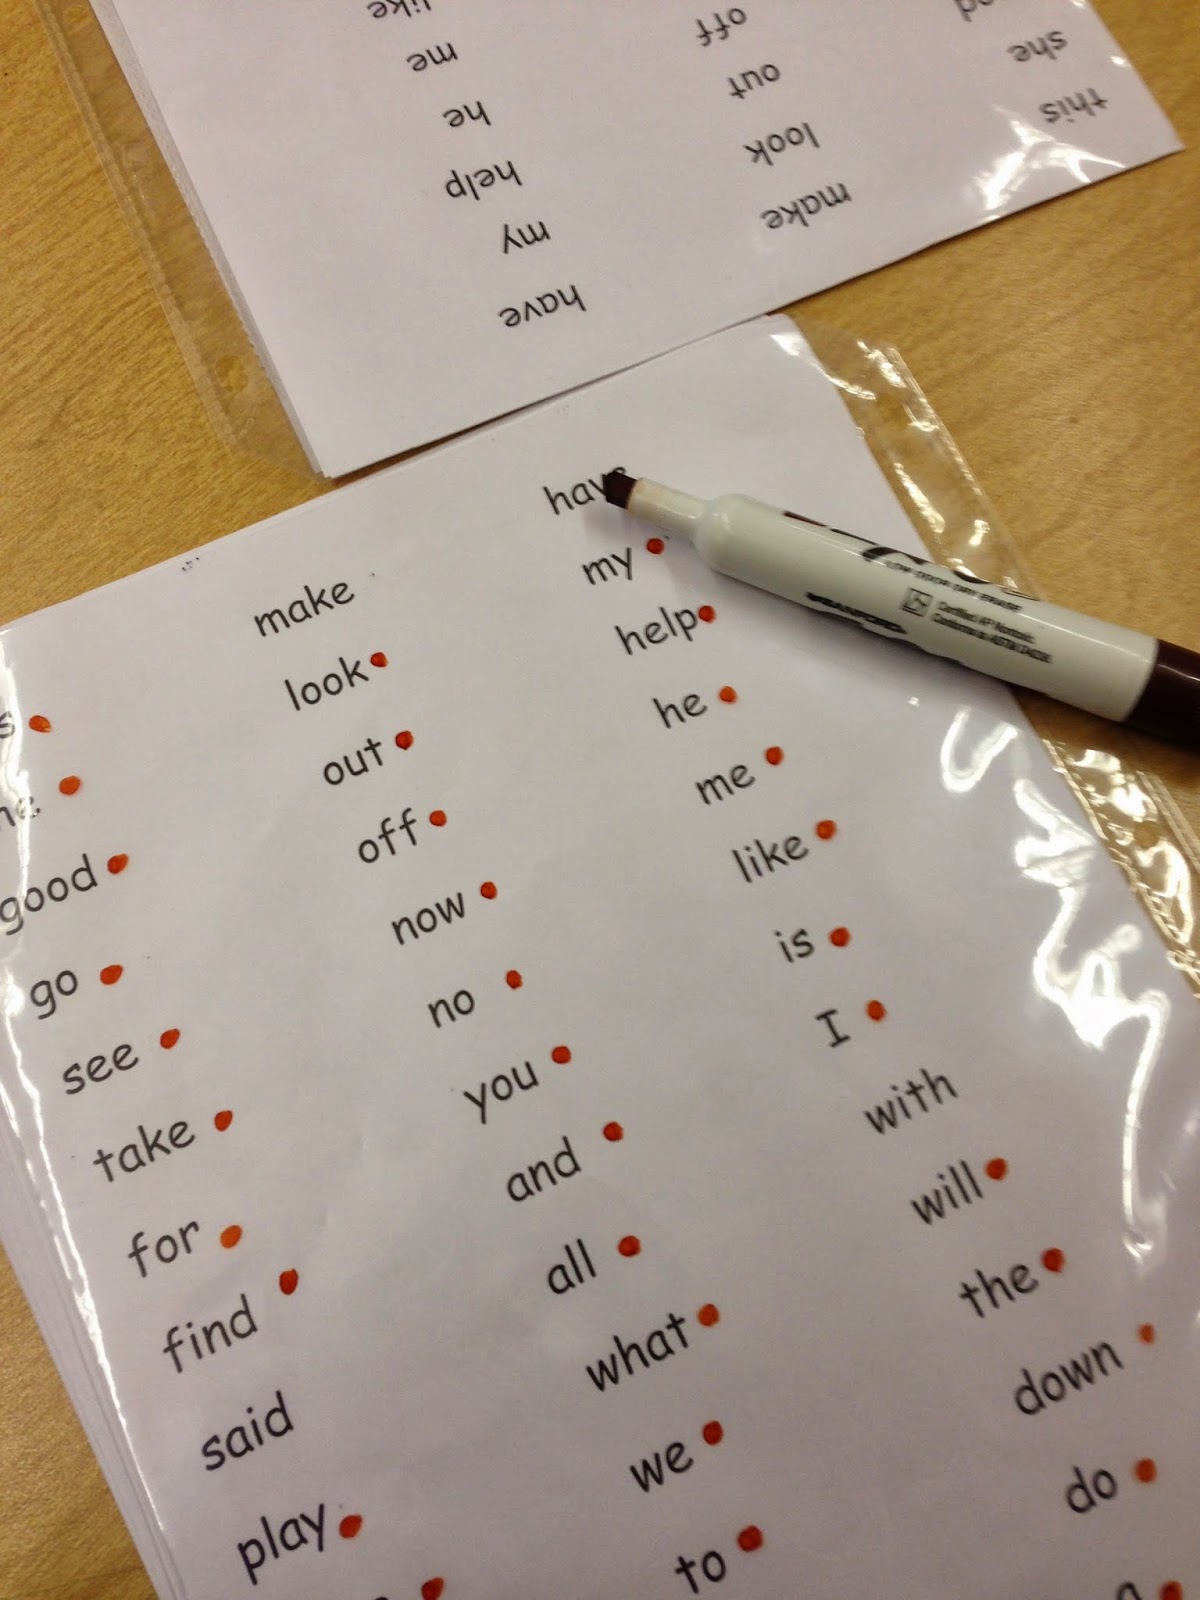 assessing sight words quickly